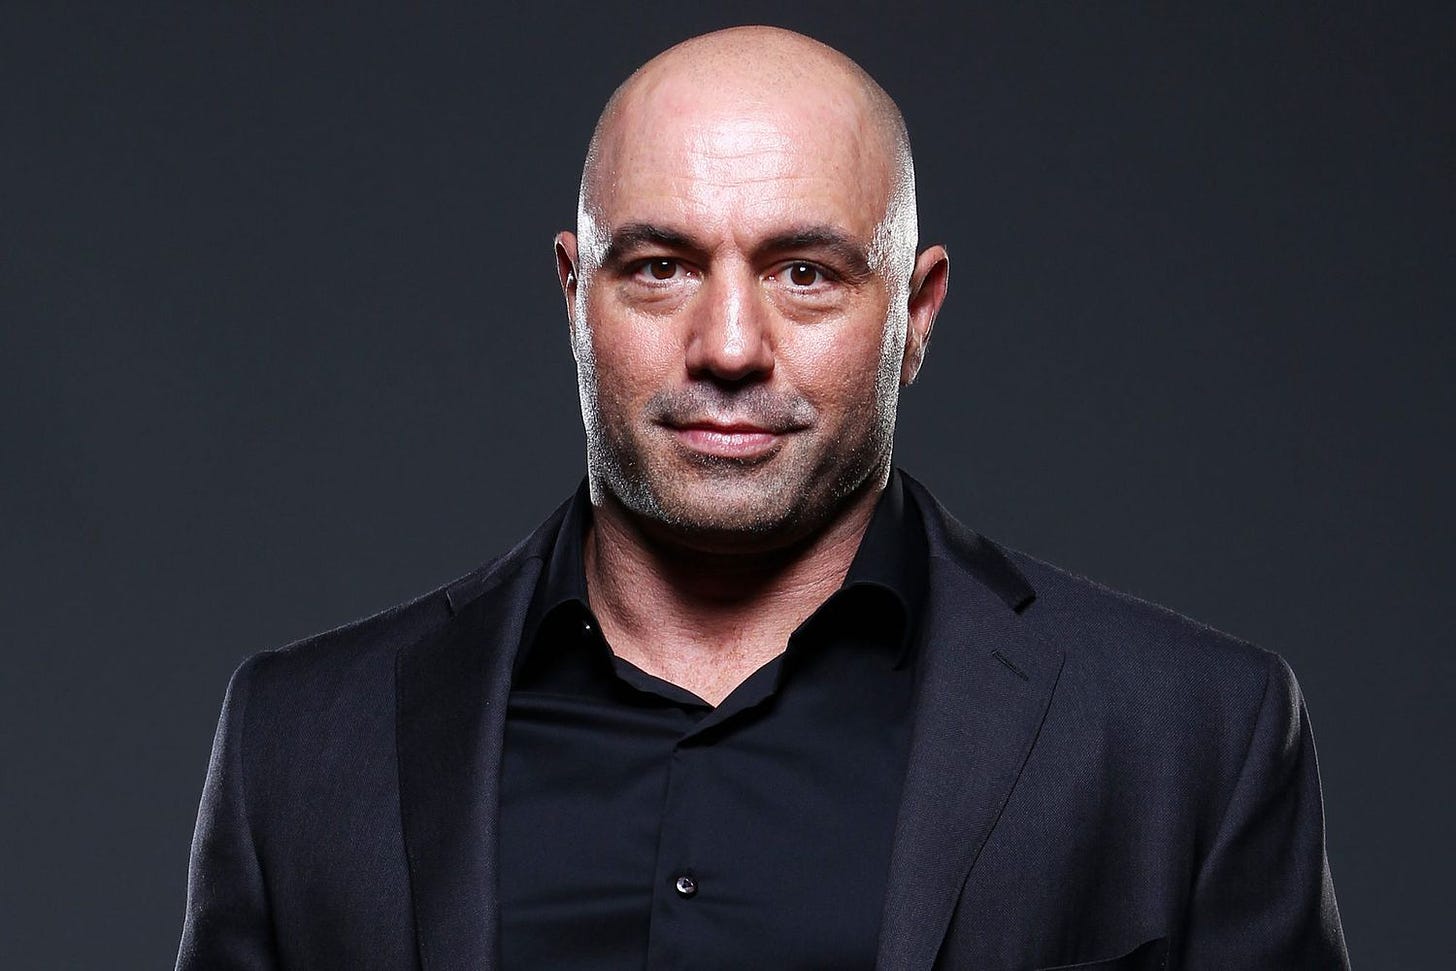 Joe Rogan Pledges to Balance Out Controversial Views on Podcast